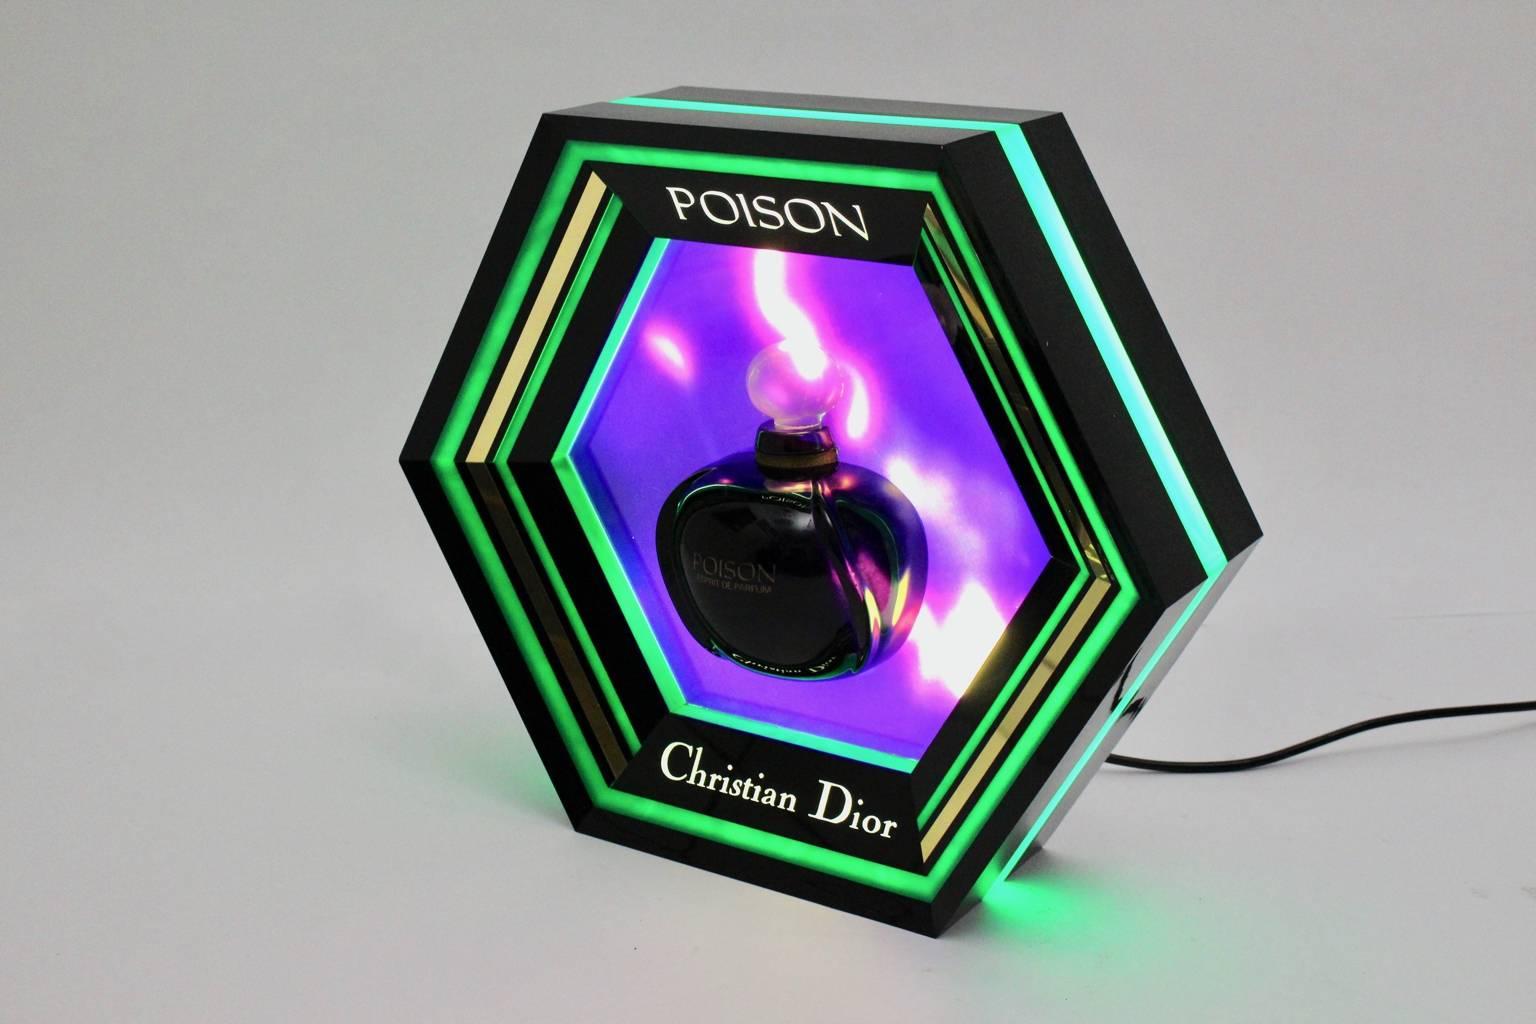 Extraordinary octagonal billboard light in the colors green, black and violet for the Parfum Poison by Christian Dior.

The parfumeur Edouard Flechier has created the Parfum Poison for Christian Dior in 1985.

The billboard light is made of plastic.